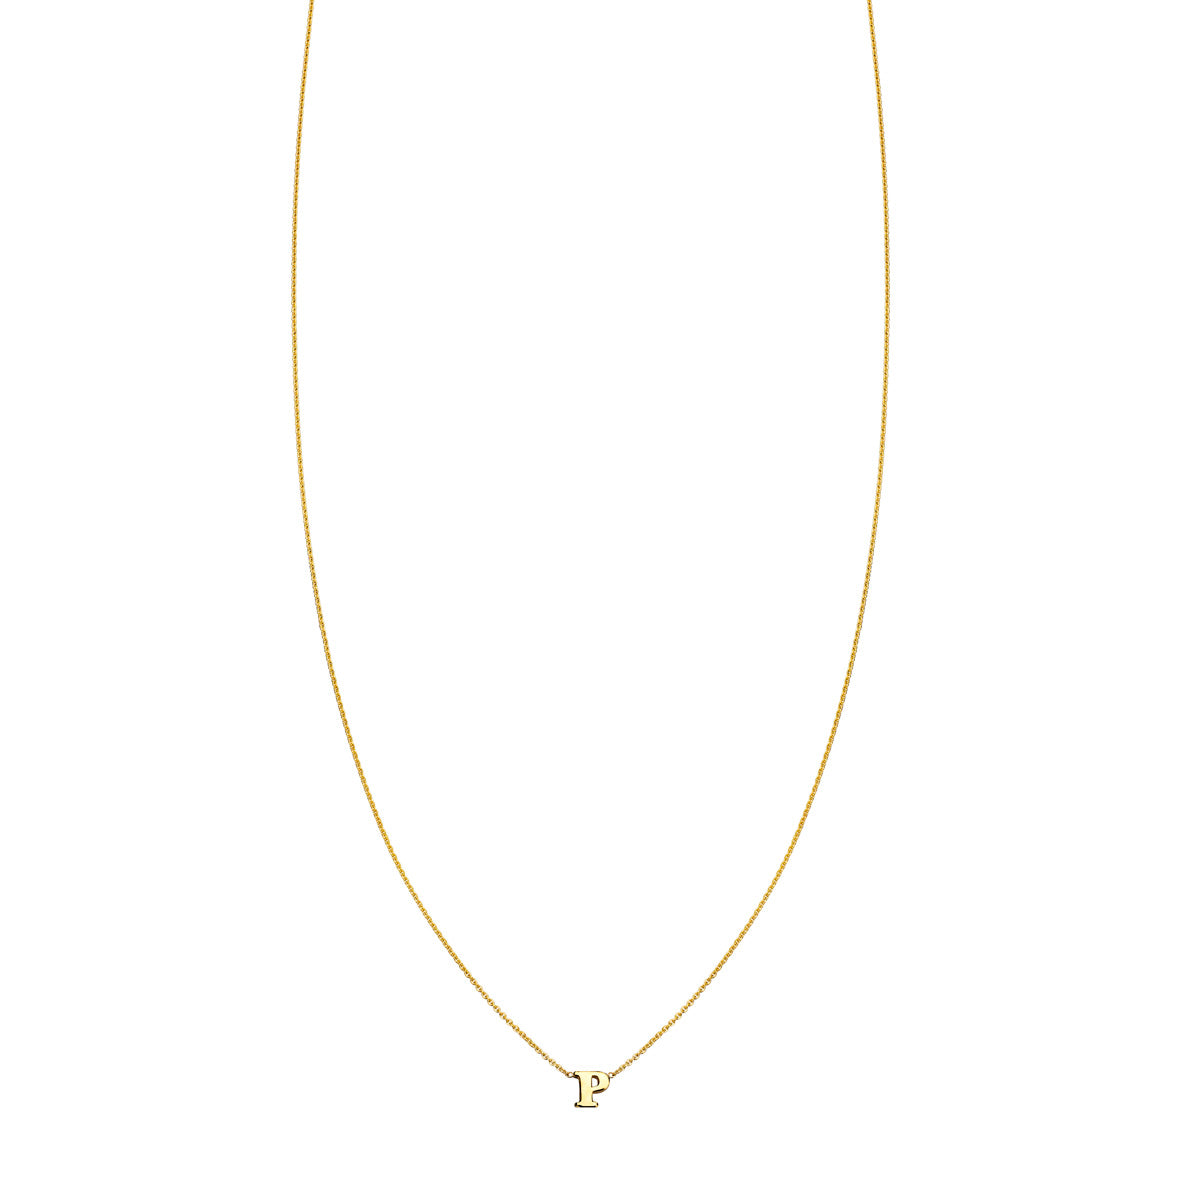 Personalized gold initial necklace with the letter 'P